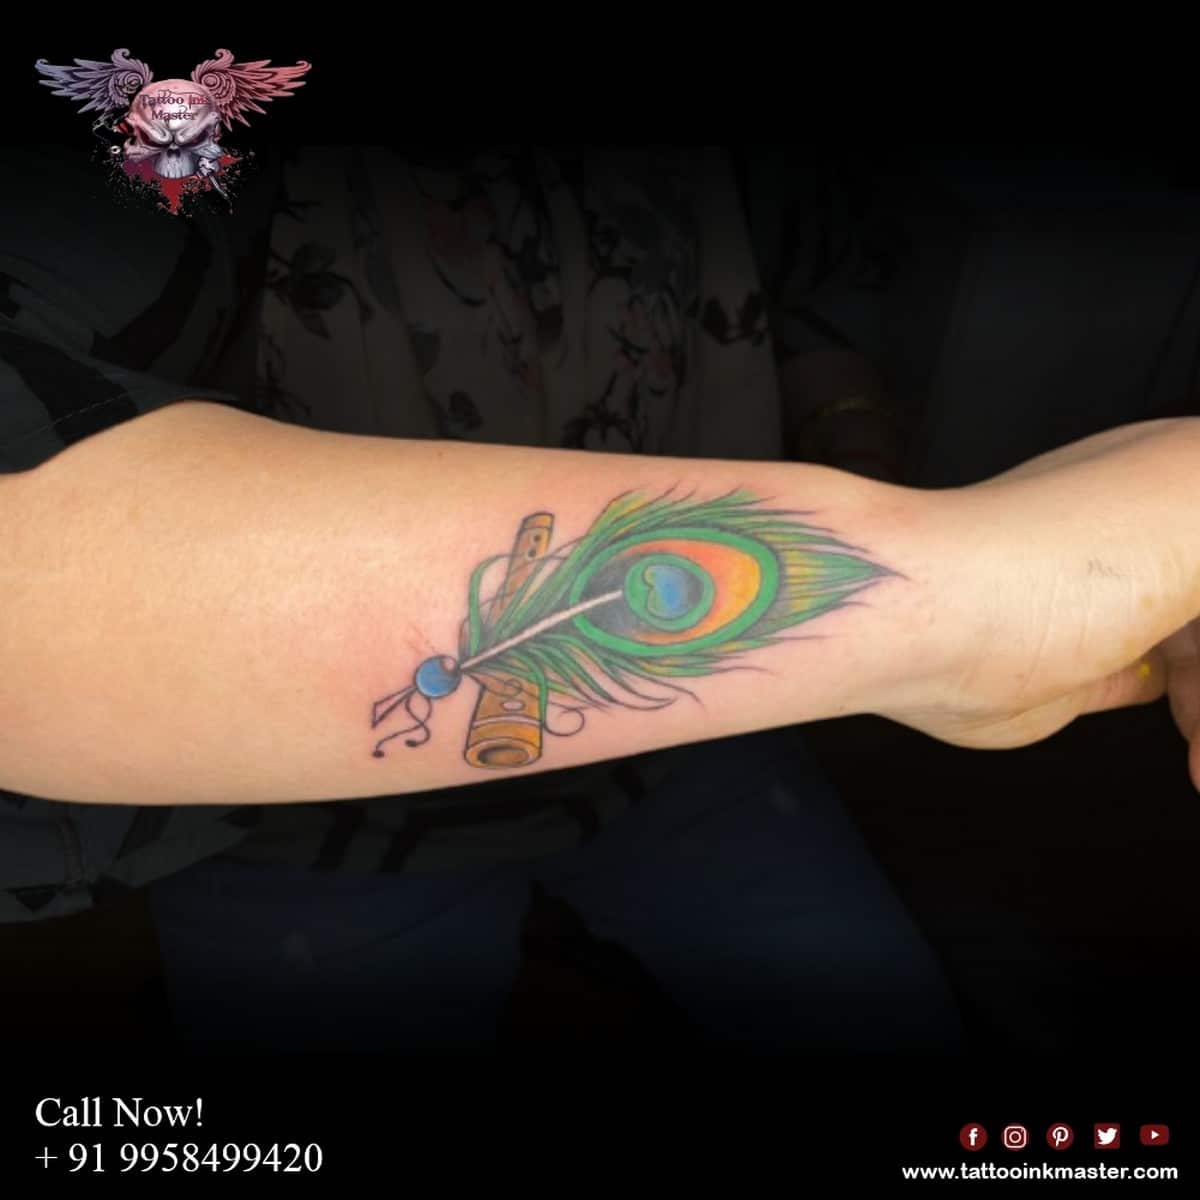 Beautiful Peacock Feather Tattoo on Hand | Tattoo Ink Master